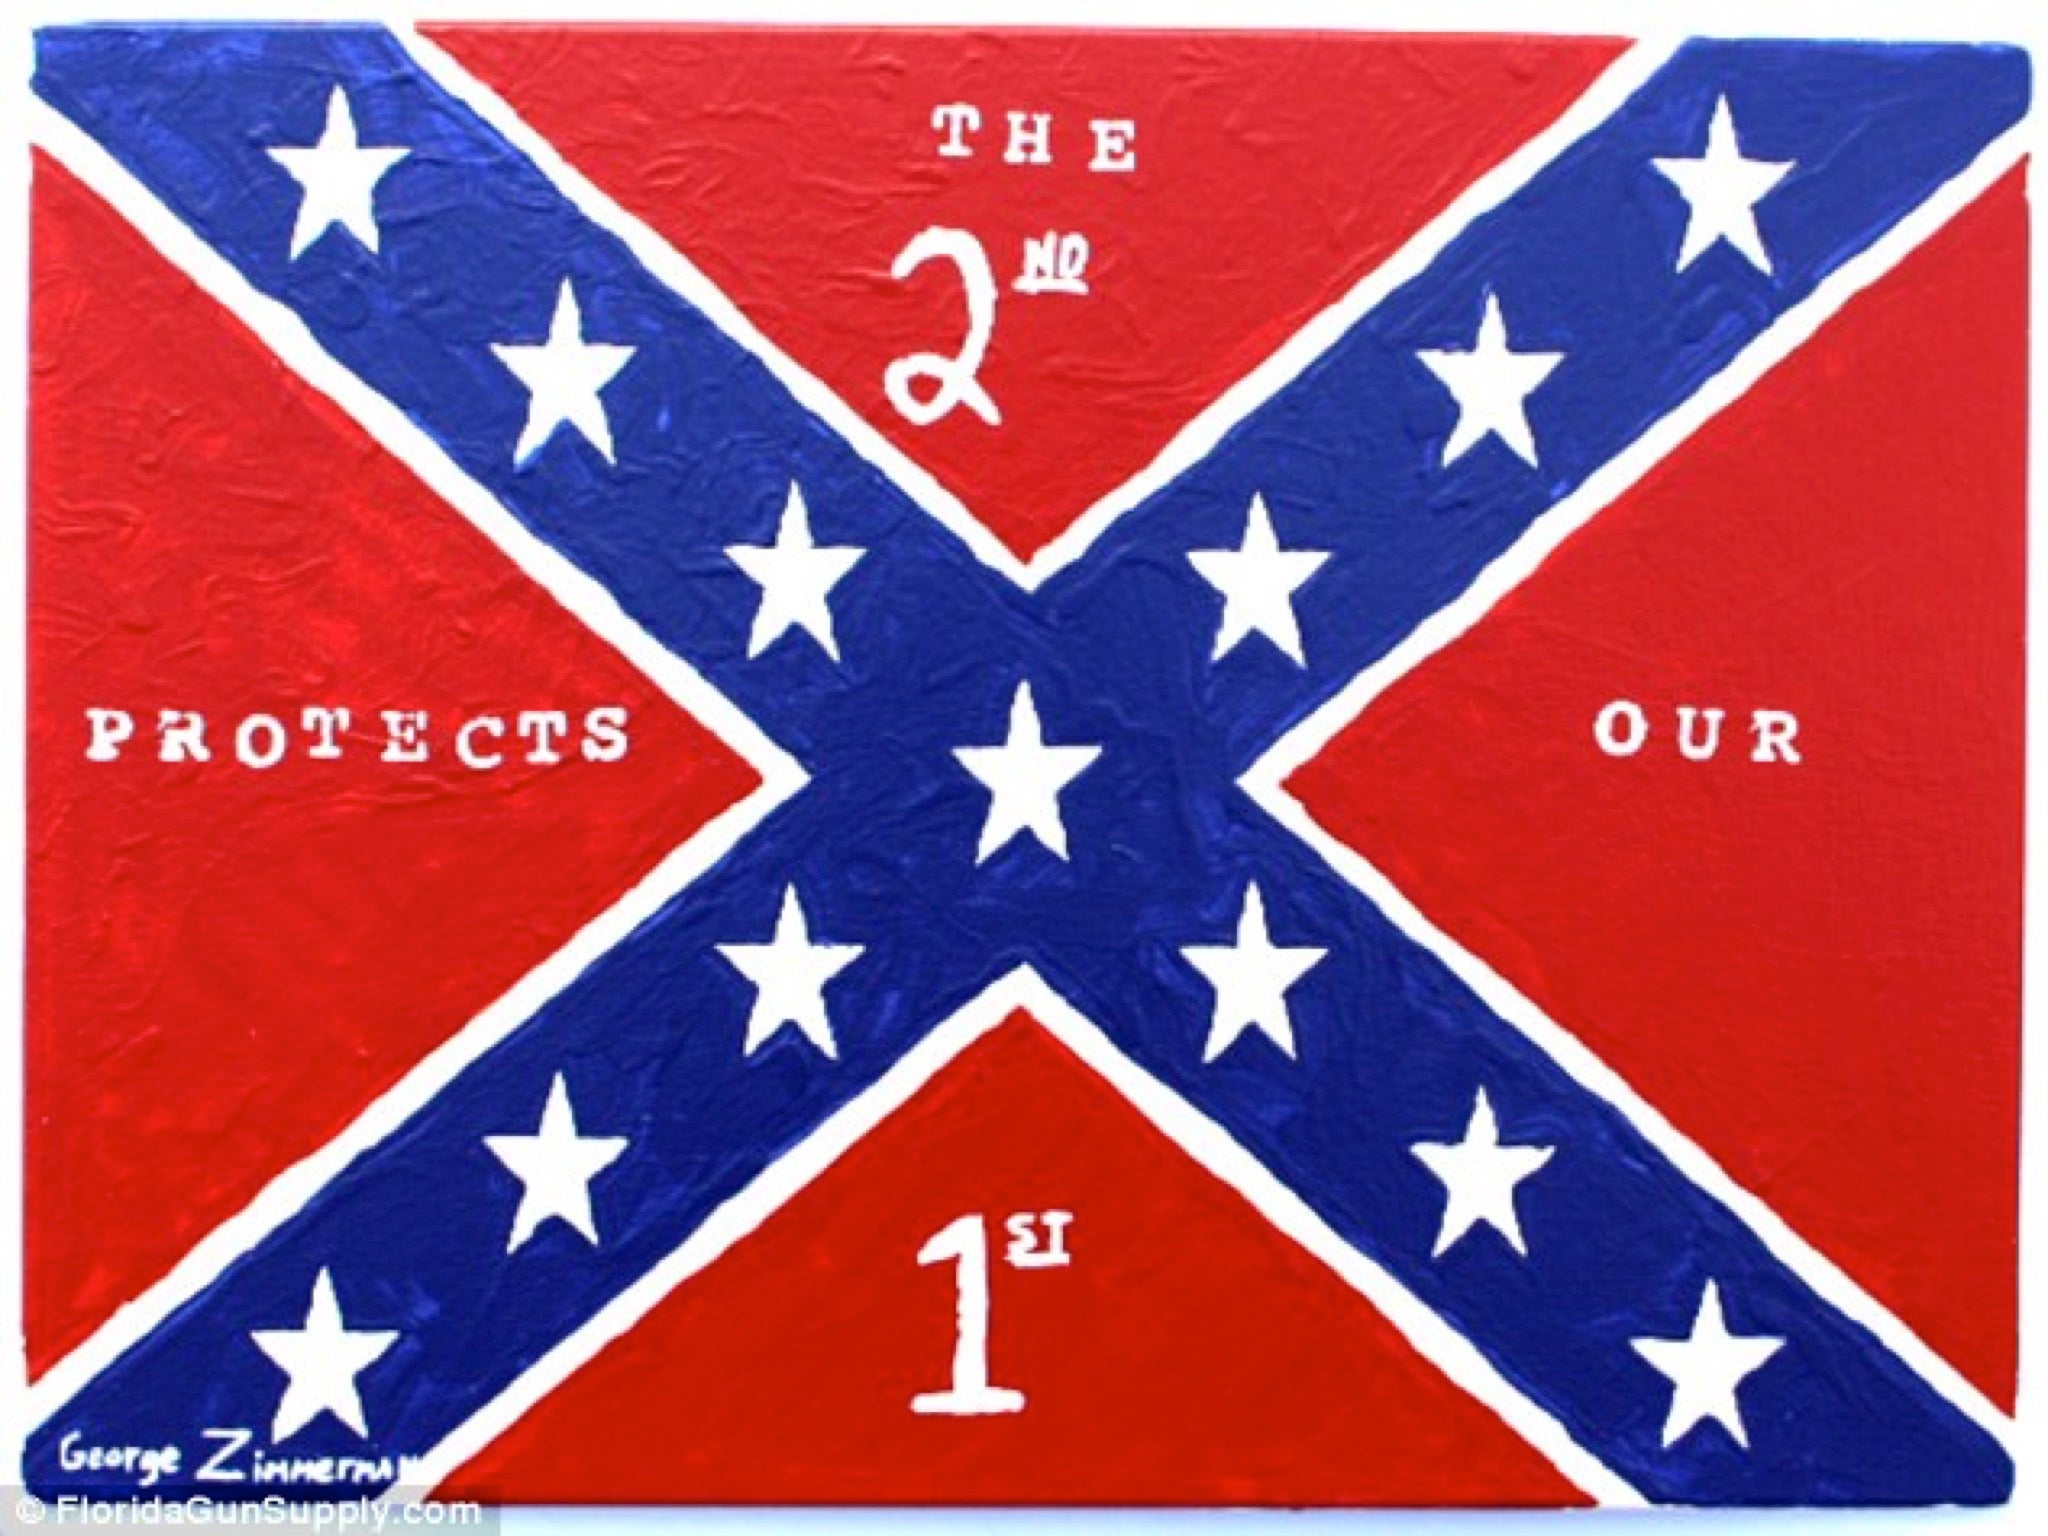 This flag is being sold by George Zimmerman